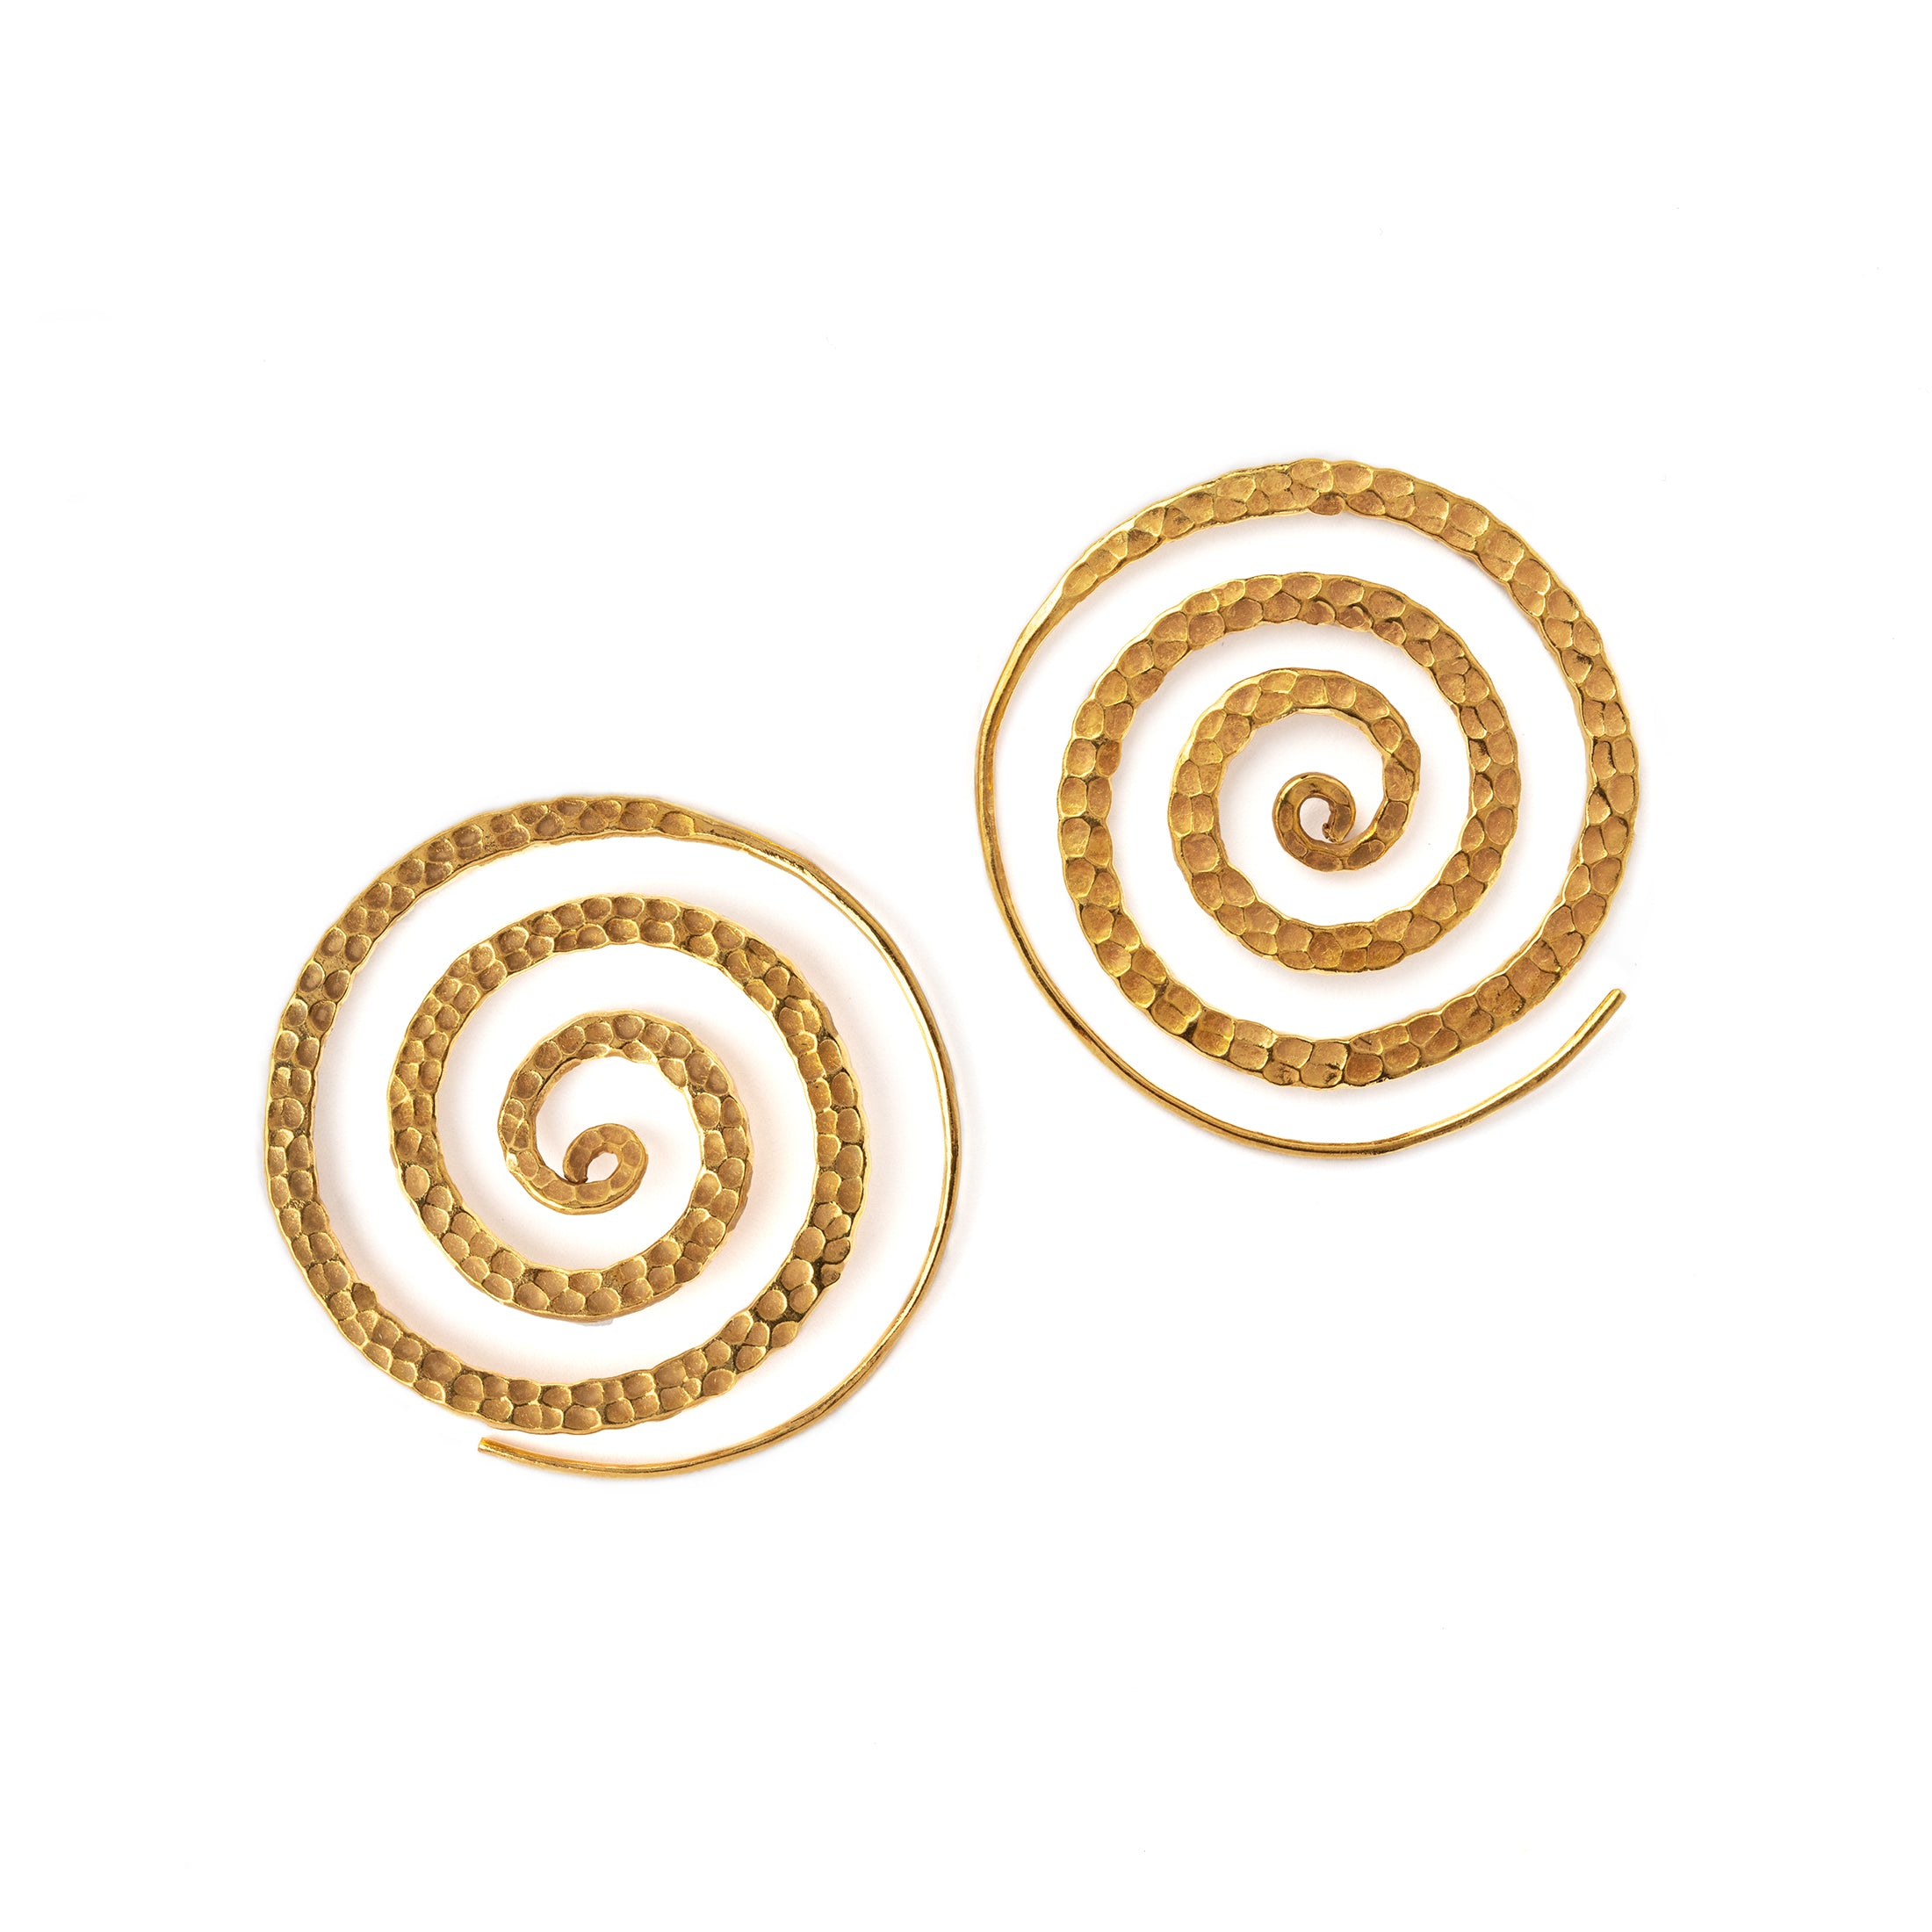  Gold Hammered Spiral Earrings frontal view